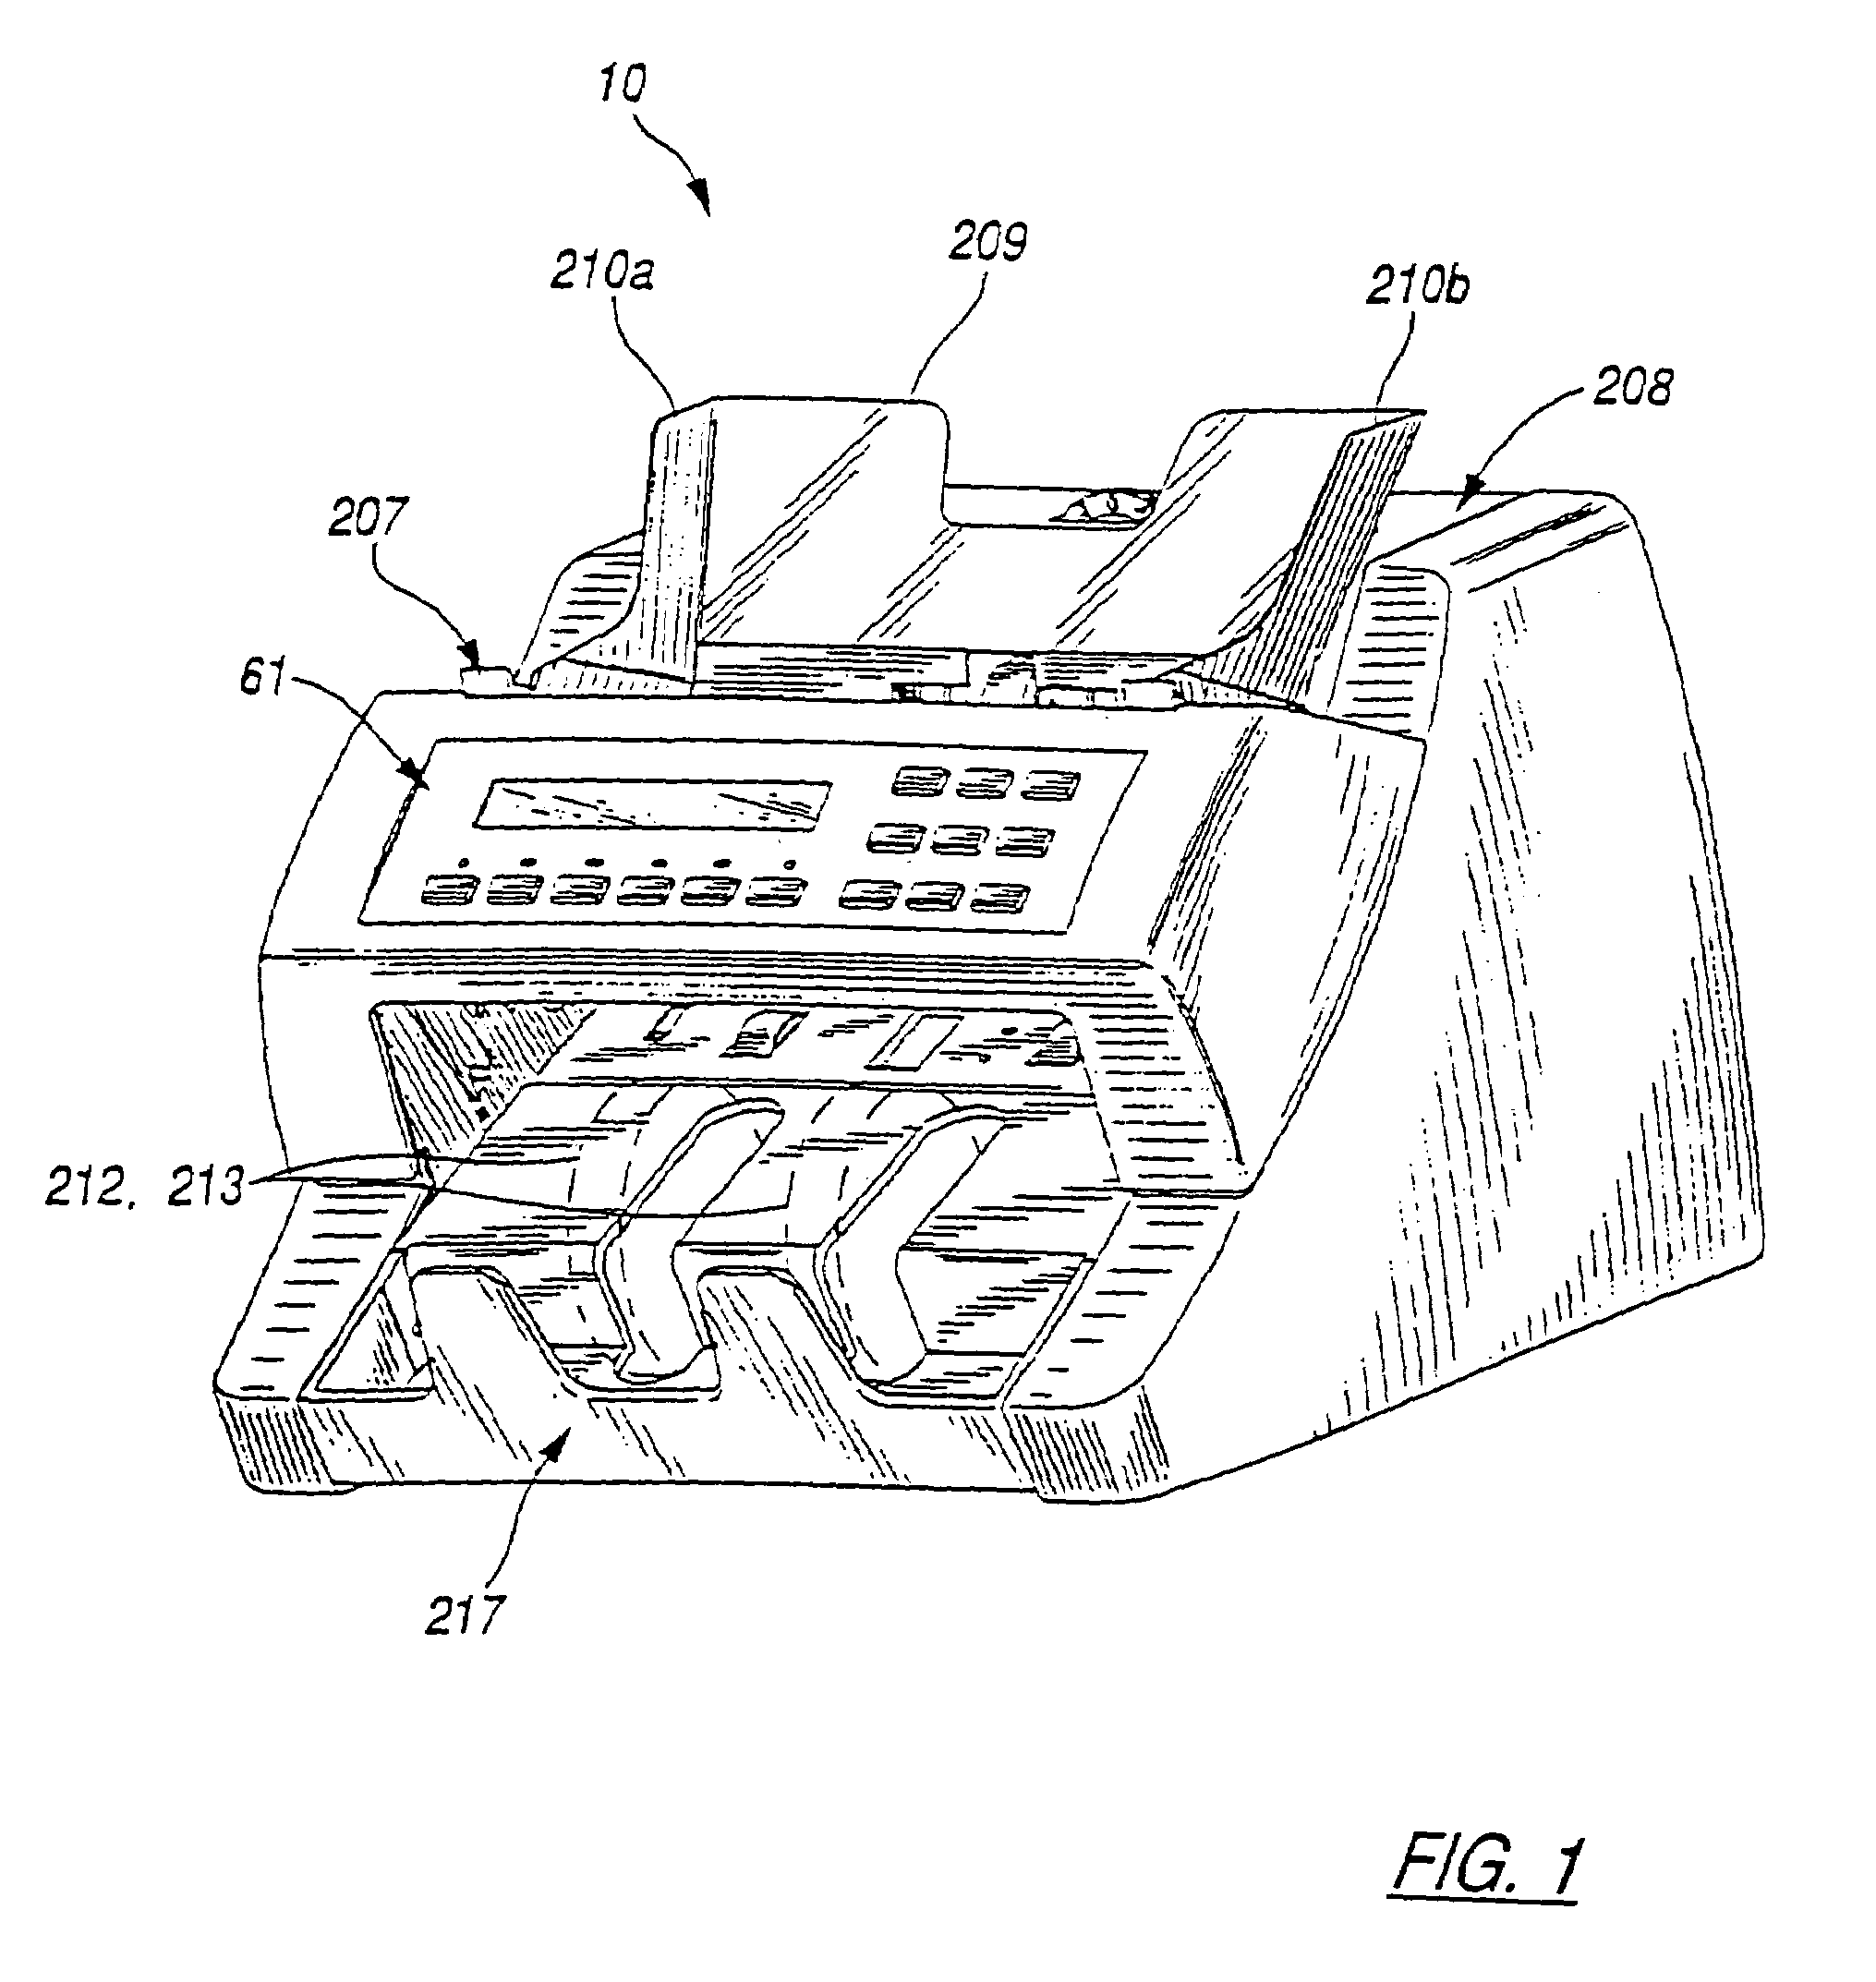 Method and apparatus for discriminating and counting documents